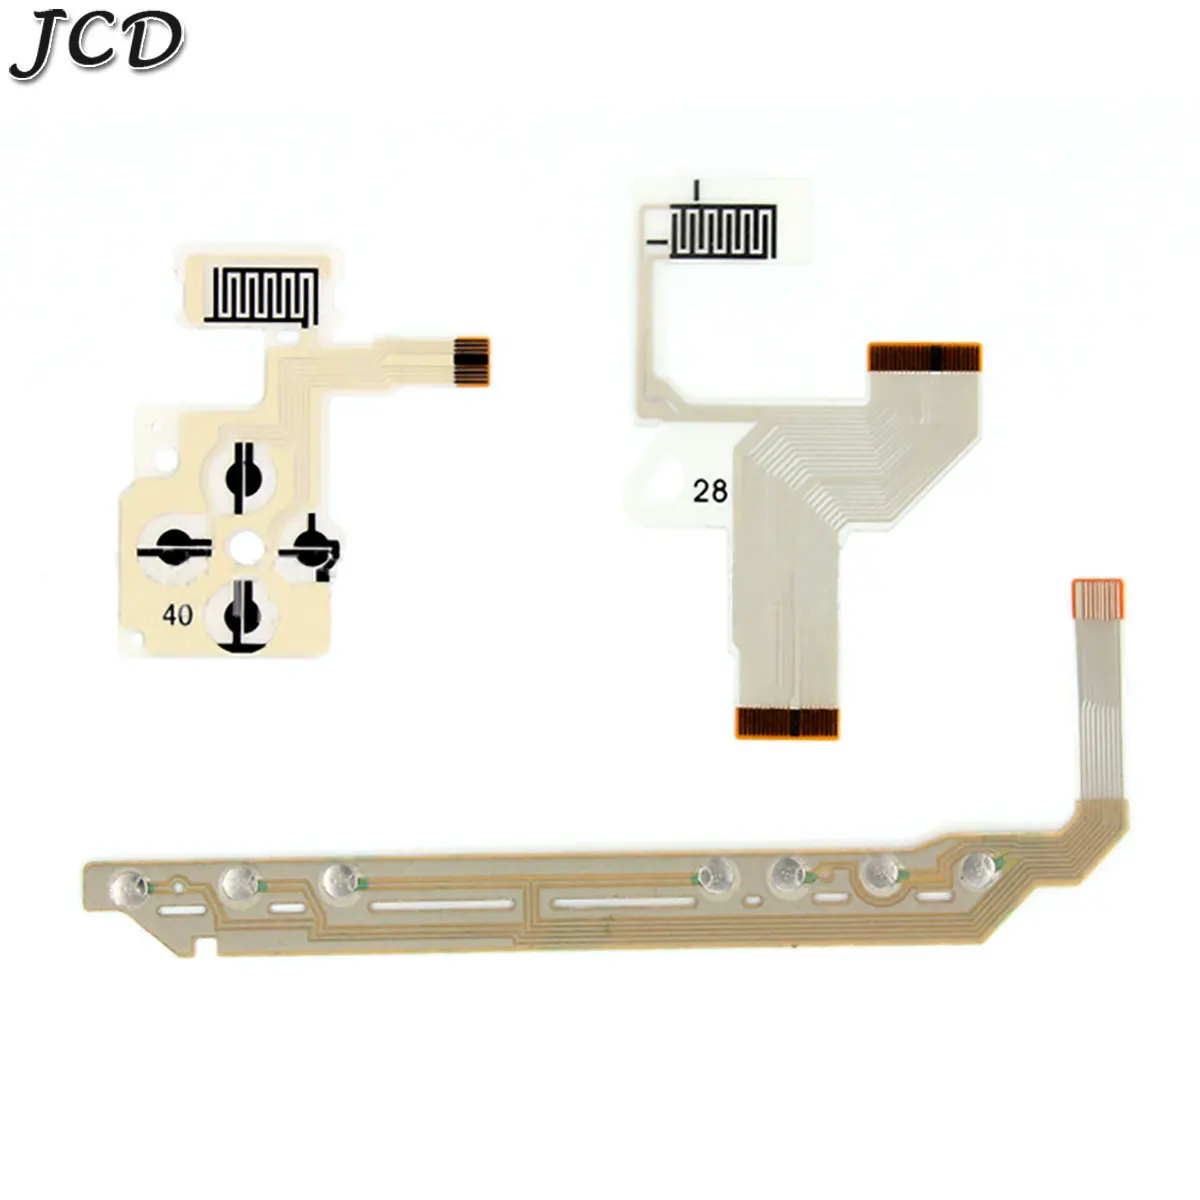 

JCD Replacement Direction Cross Button Left Key Volume Right Keypad Flex Cable for PSP 1000 / PSP 1004 1001 1008